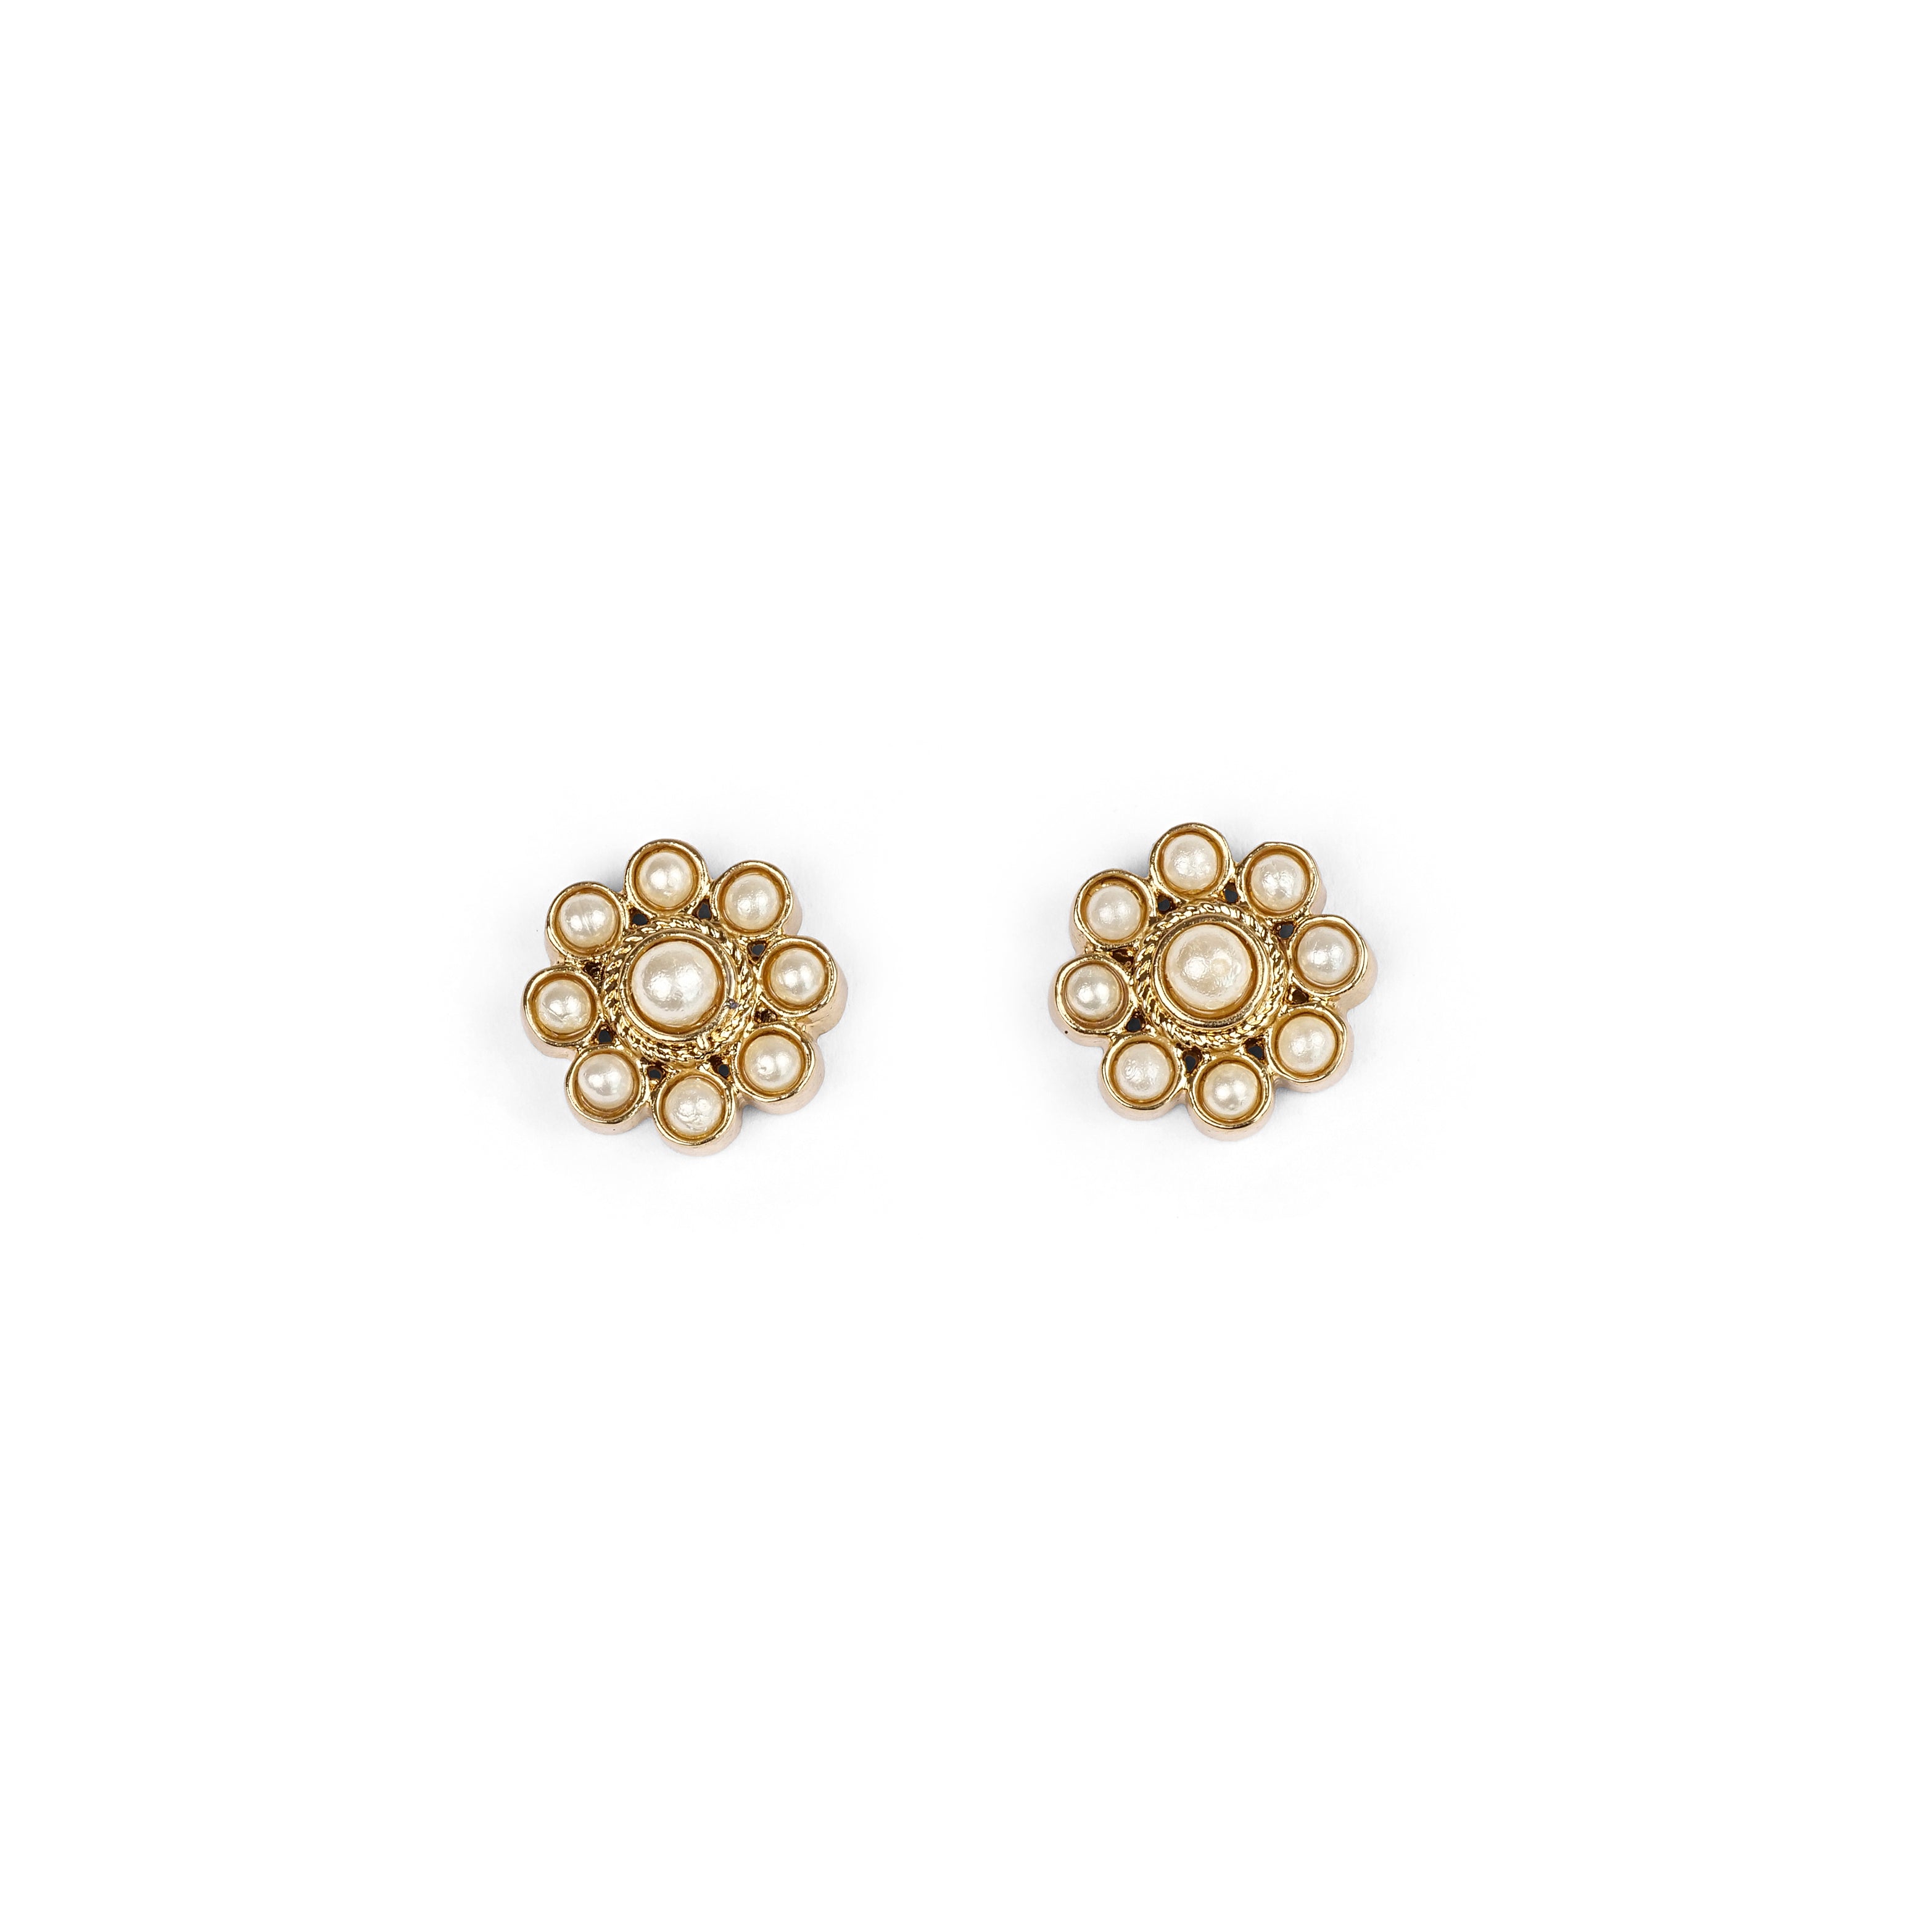 Frida Floral Earstuds in Pearl